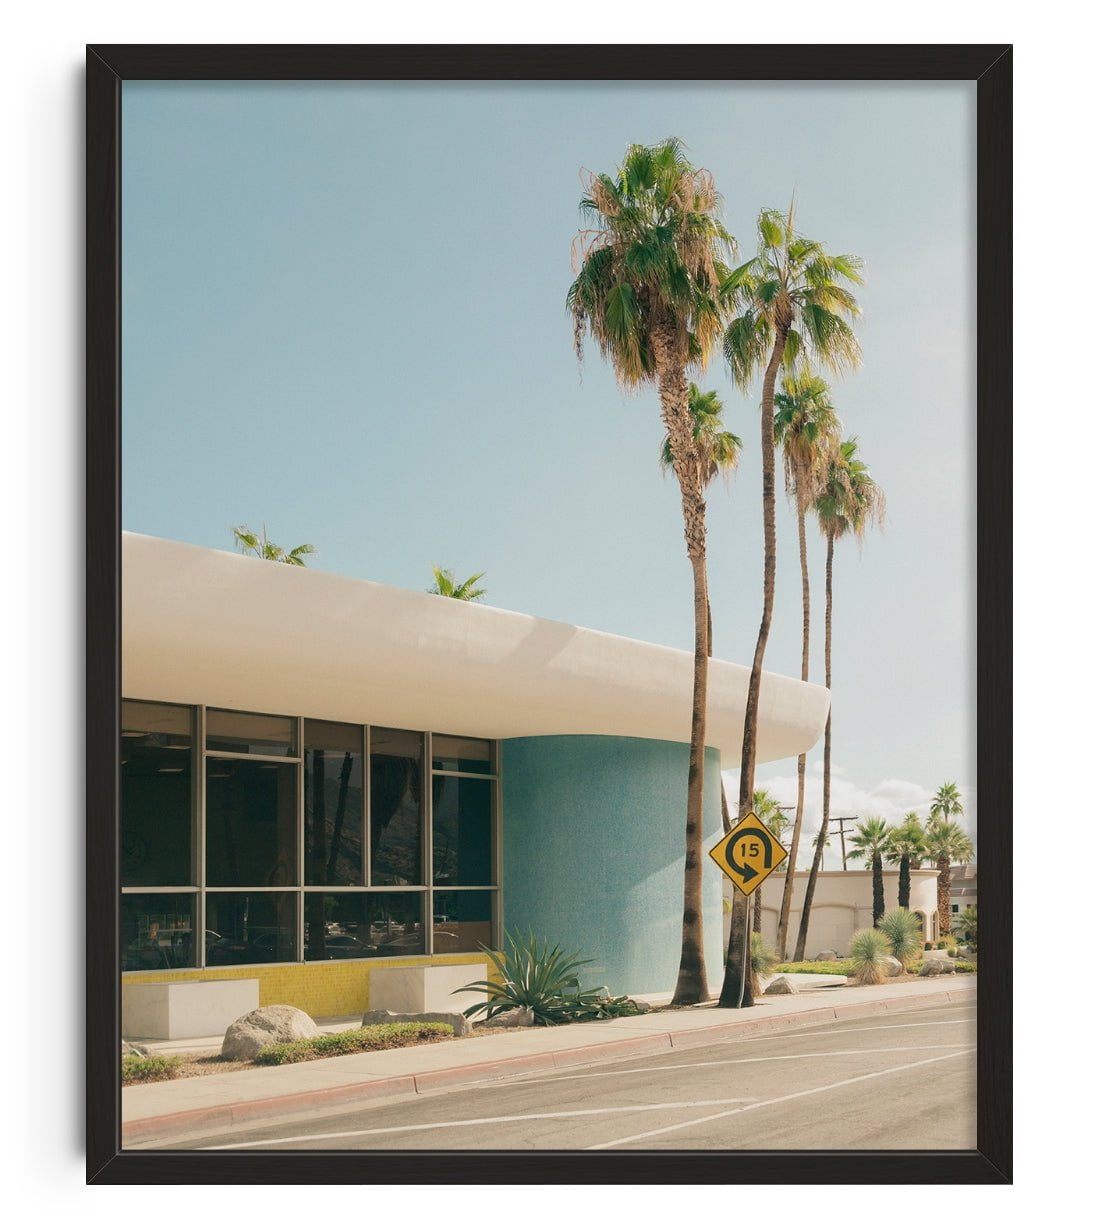 PALM SPRING contemporary wall art print by Gregory Tauziac - sold by DROOL